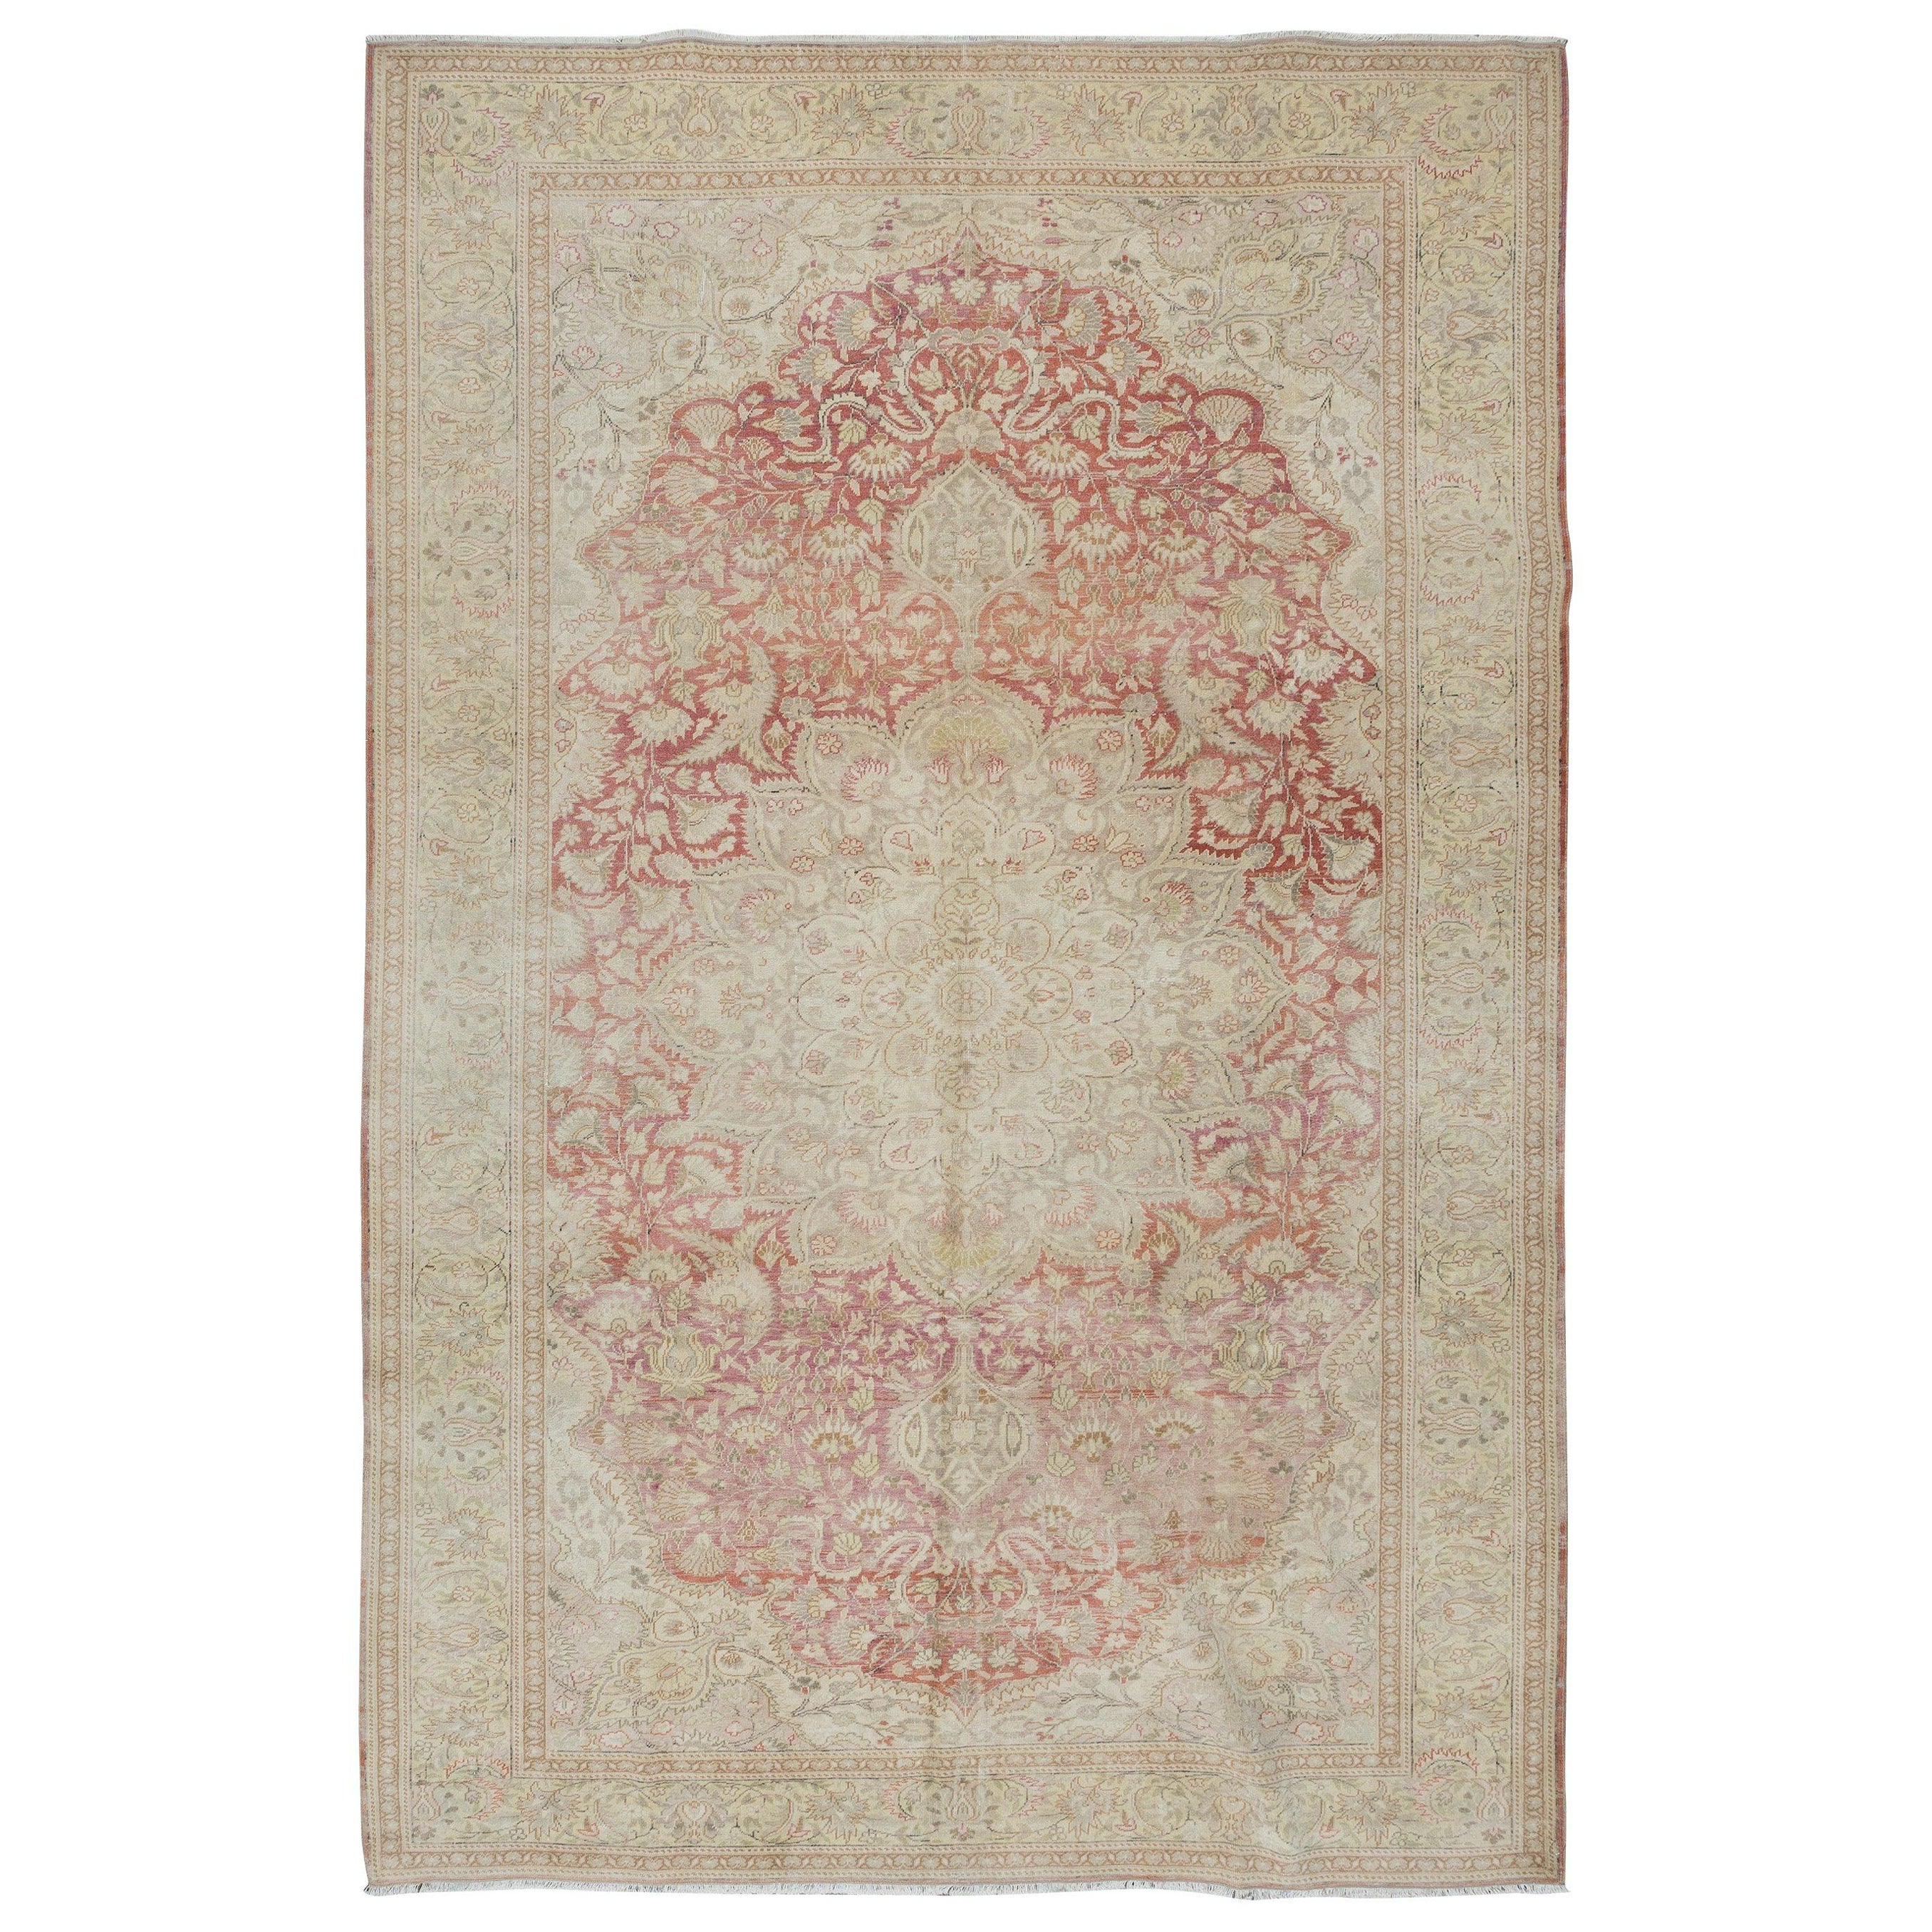 6.3x9.6 Ft Hand Knotted Turkish Area Rug in Beige & Red with Medallion Design For Sale